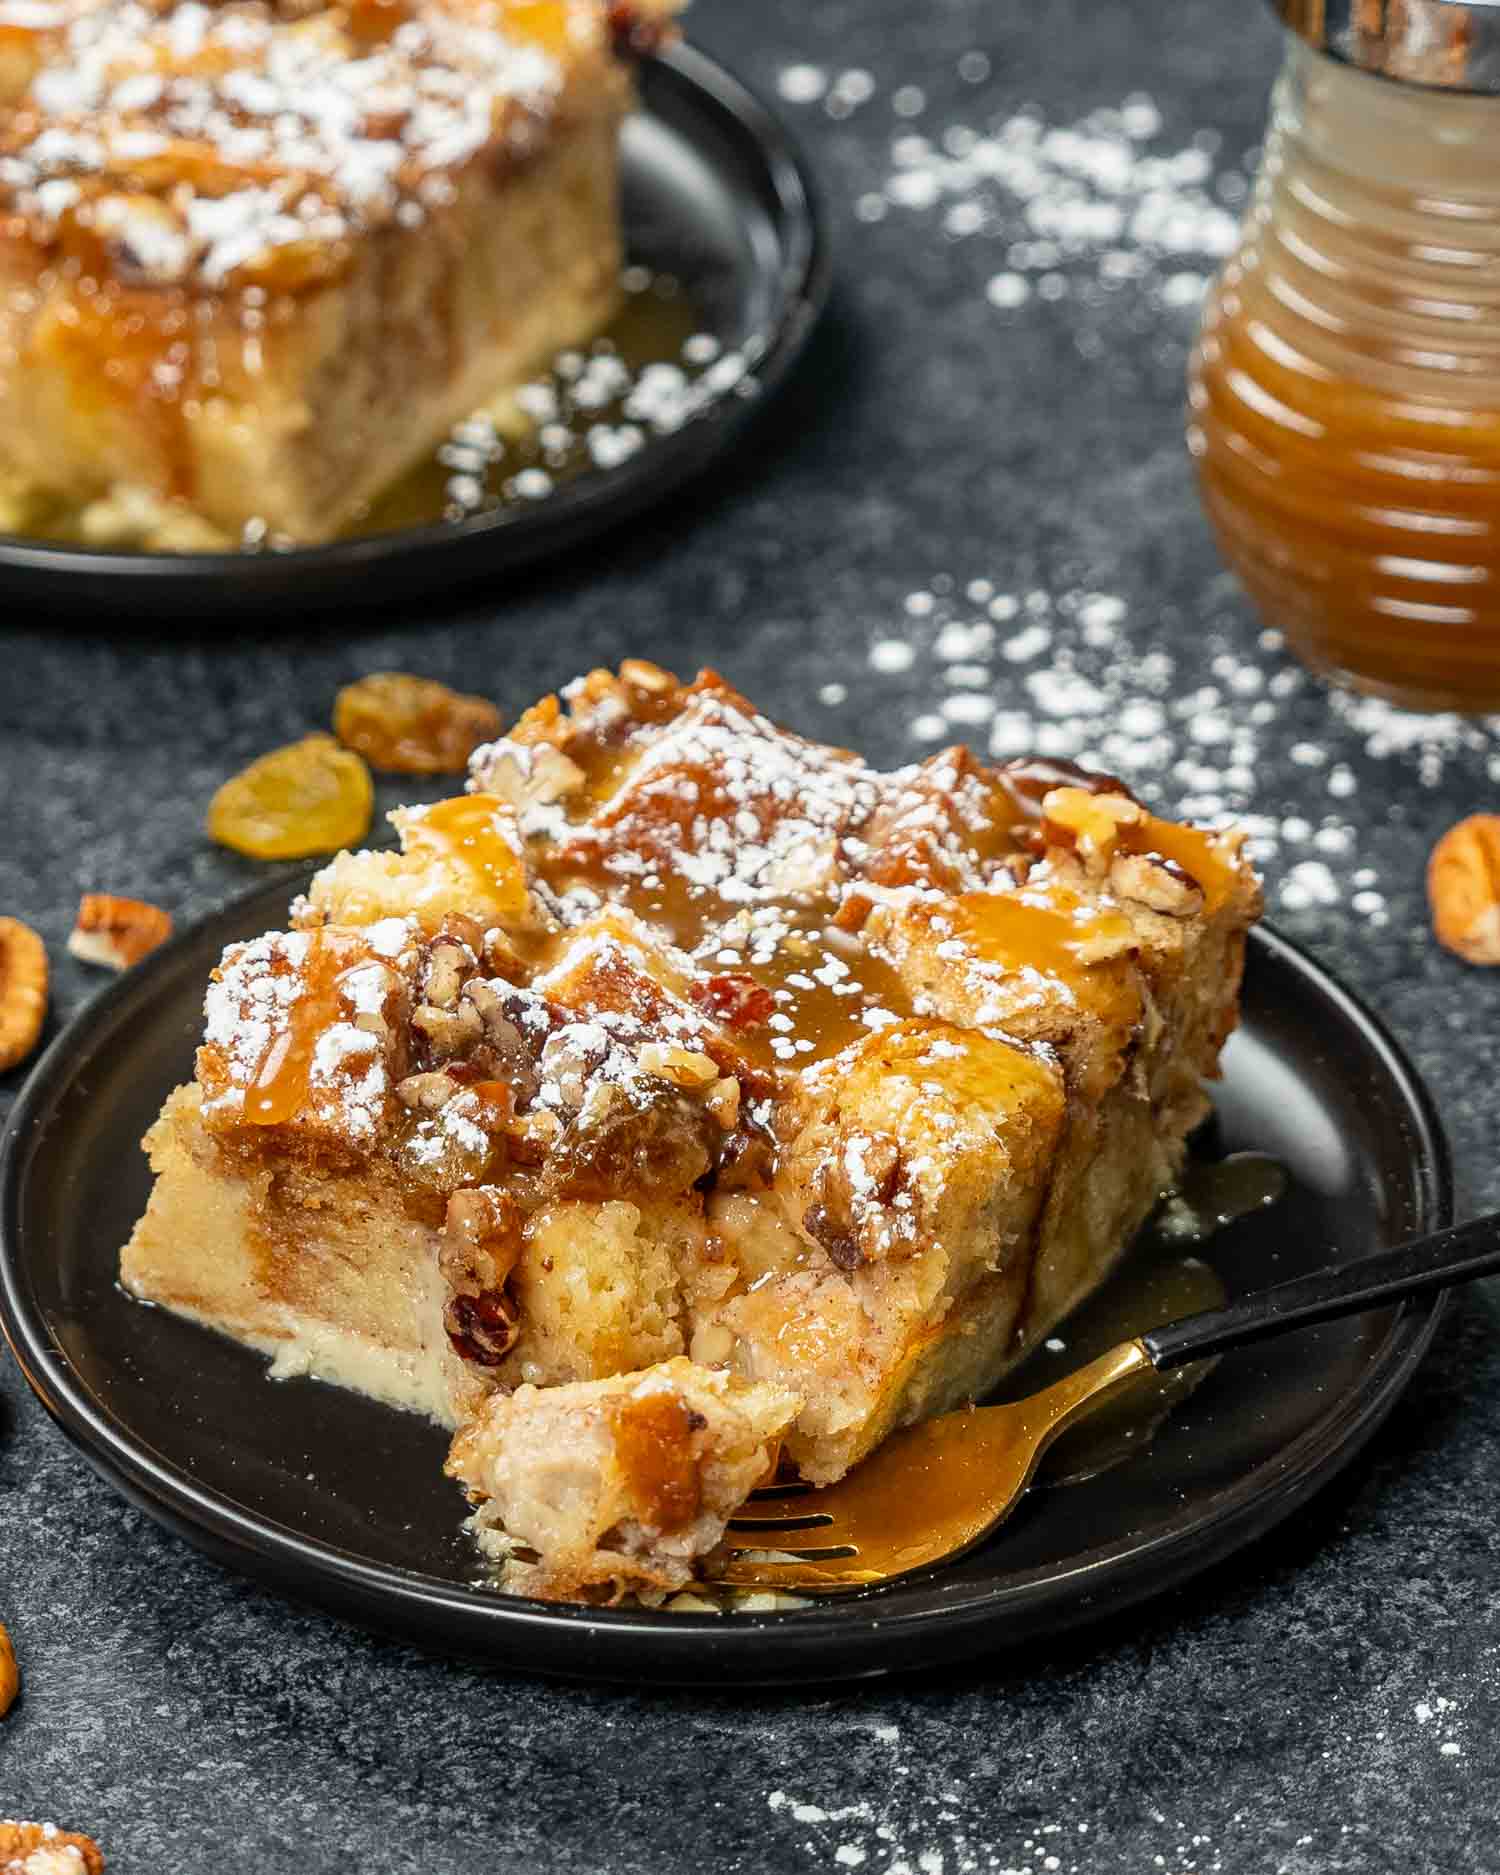 a slice of bread pudding with caramel sauce on a black plate.